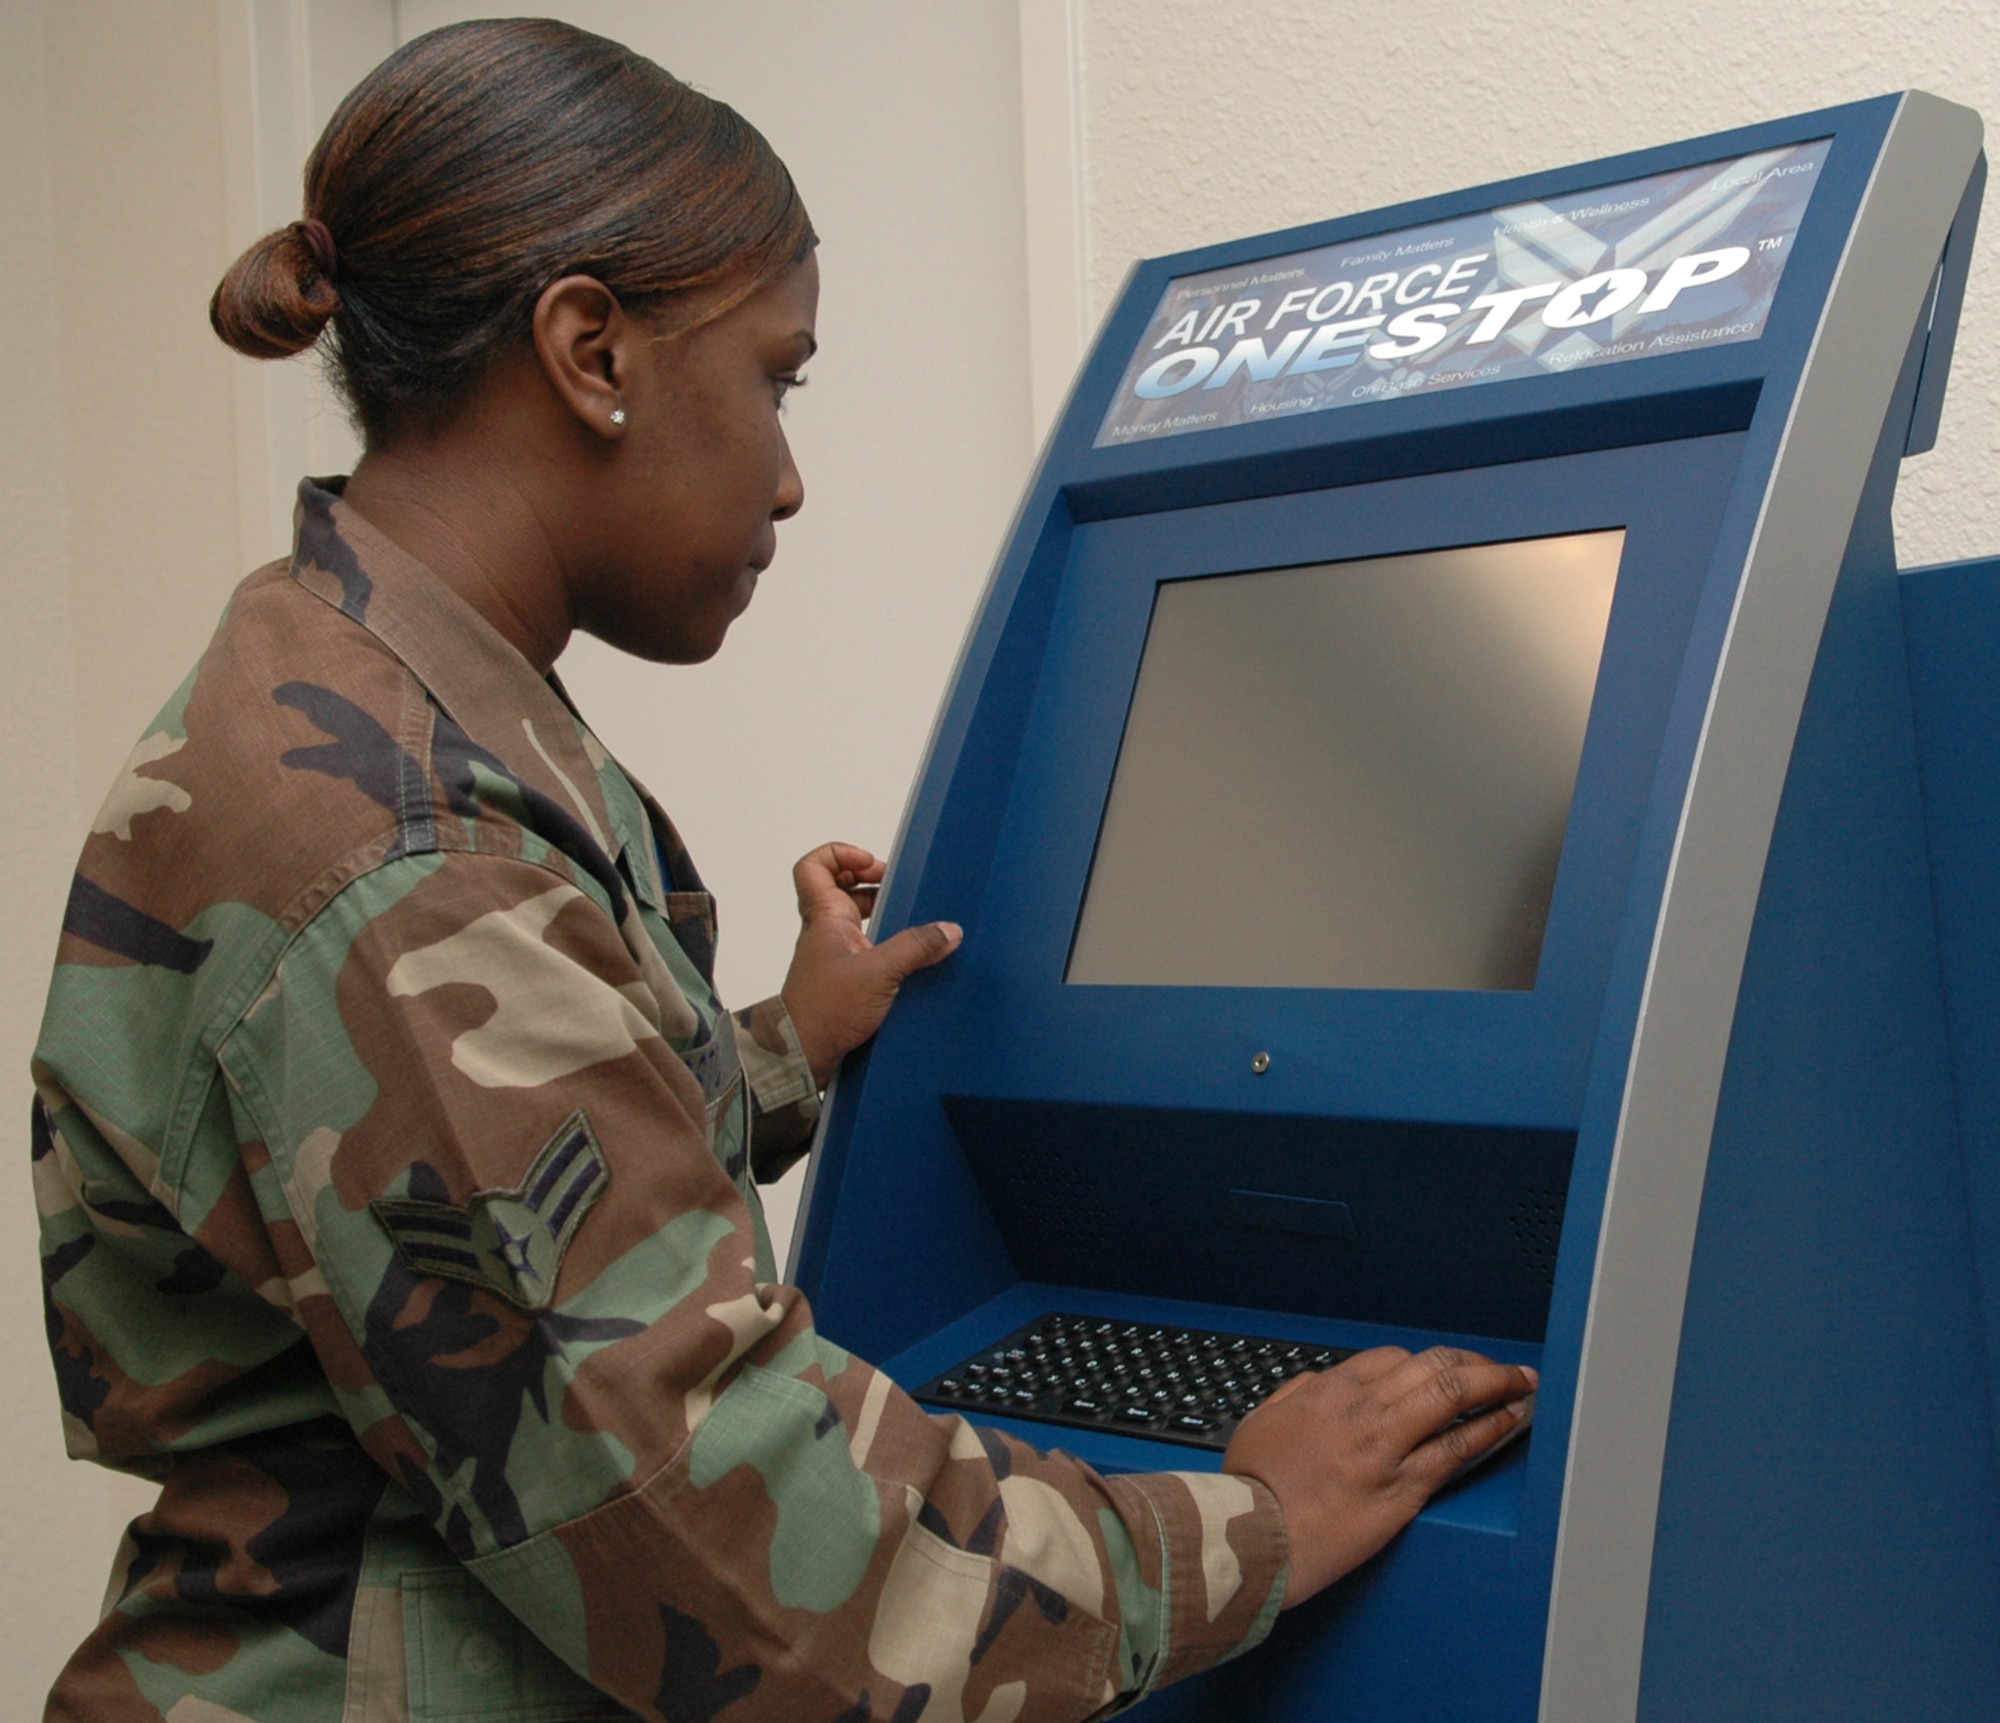 Airman first class Traci Coston, 49th Comptroller Squadron, 49th fighter wing, Holloman Air Force Base, New Mexico signs on to the new MyPay kiosk. The MyPay kiosk is the "Air Force one stop shop". It will allow military members and civilians to check leave and earning statements to help answer any financial questions by use of a touch screen computer available at the Base Exchange during hours of operations. (USAF photo by SRA Jessica De Pierri)